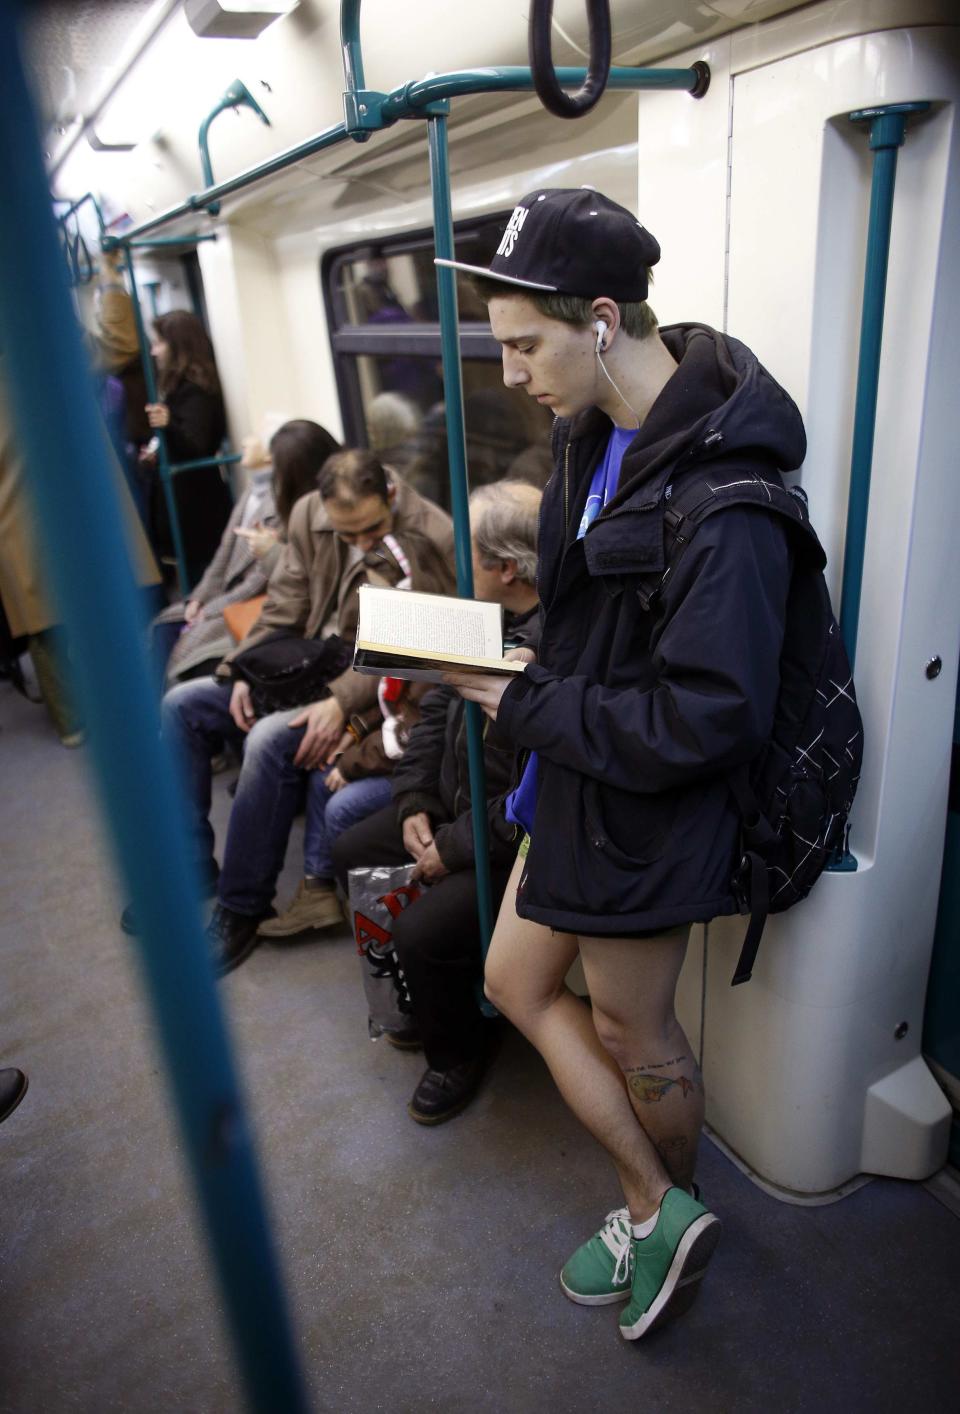 Passenger without his pants reads a book as he uses a subway train during the "No Pants Subway Ride" event in Sofia